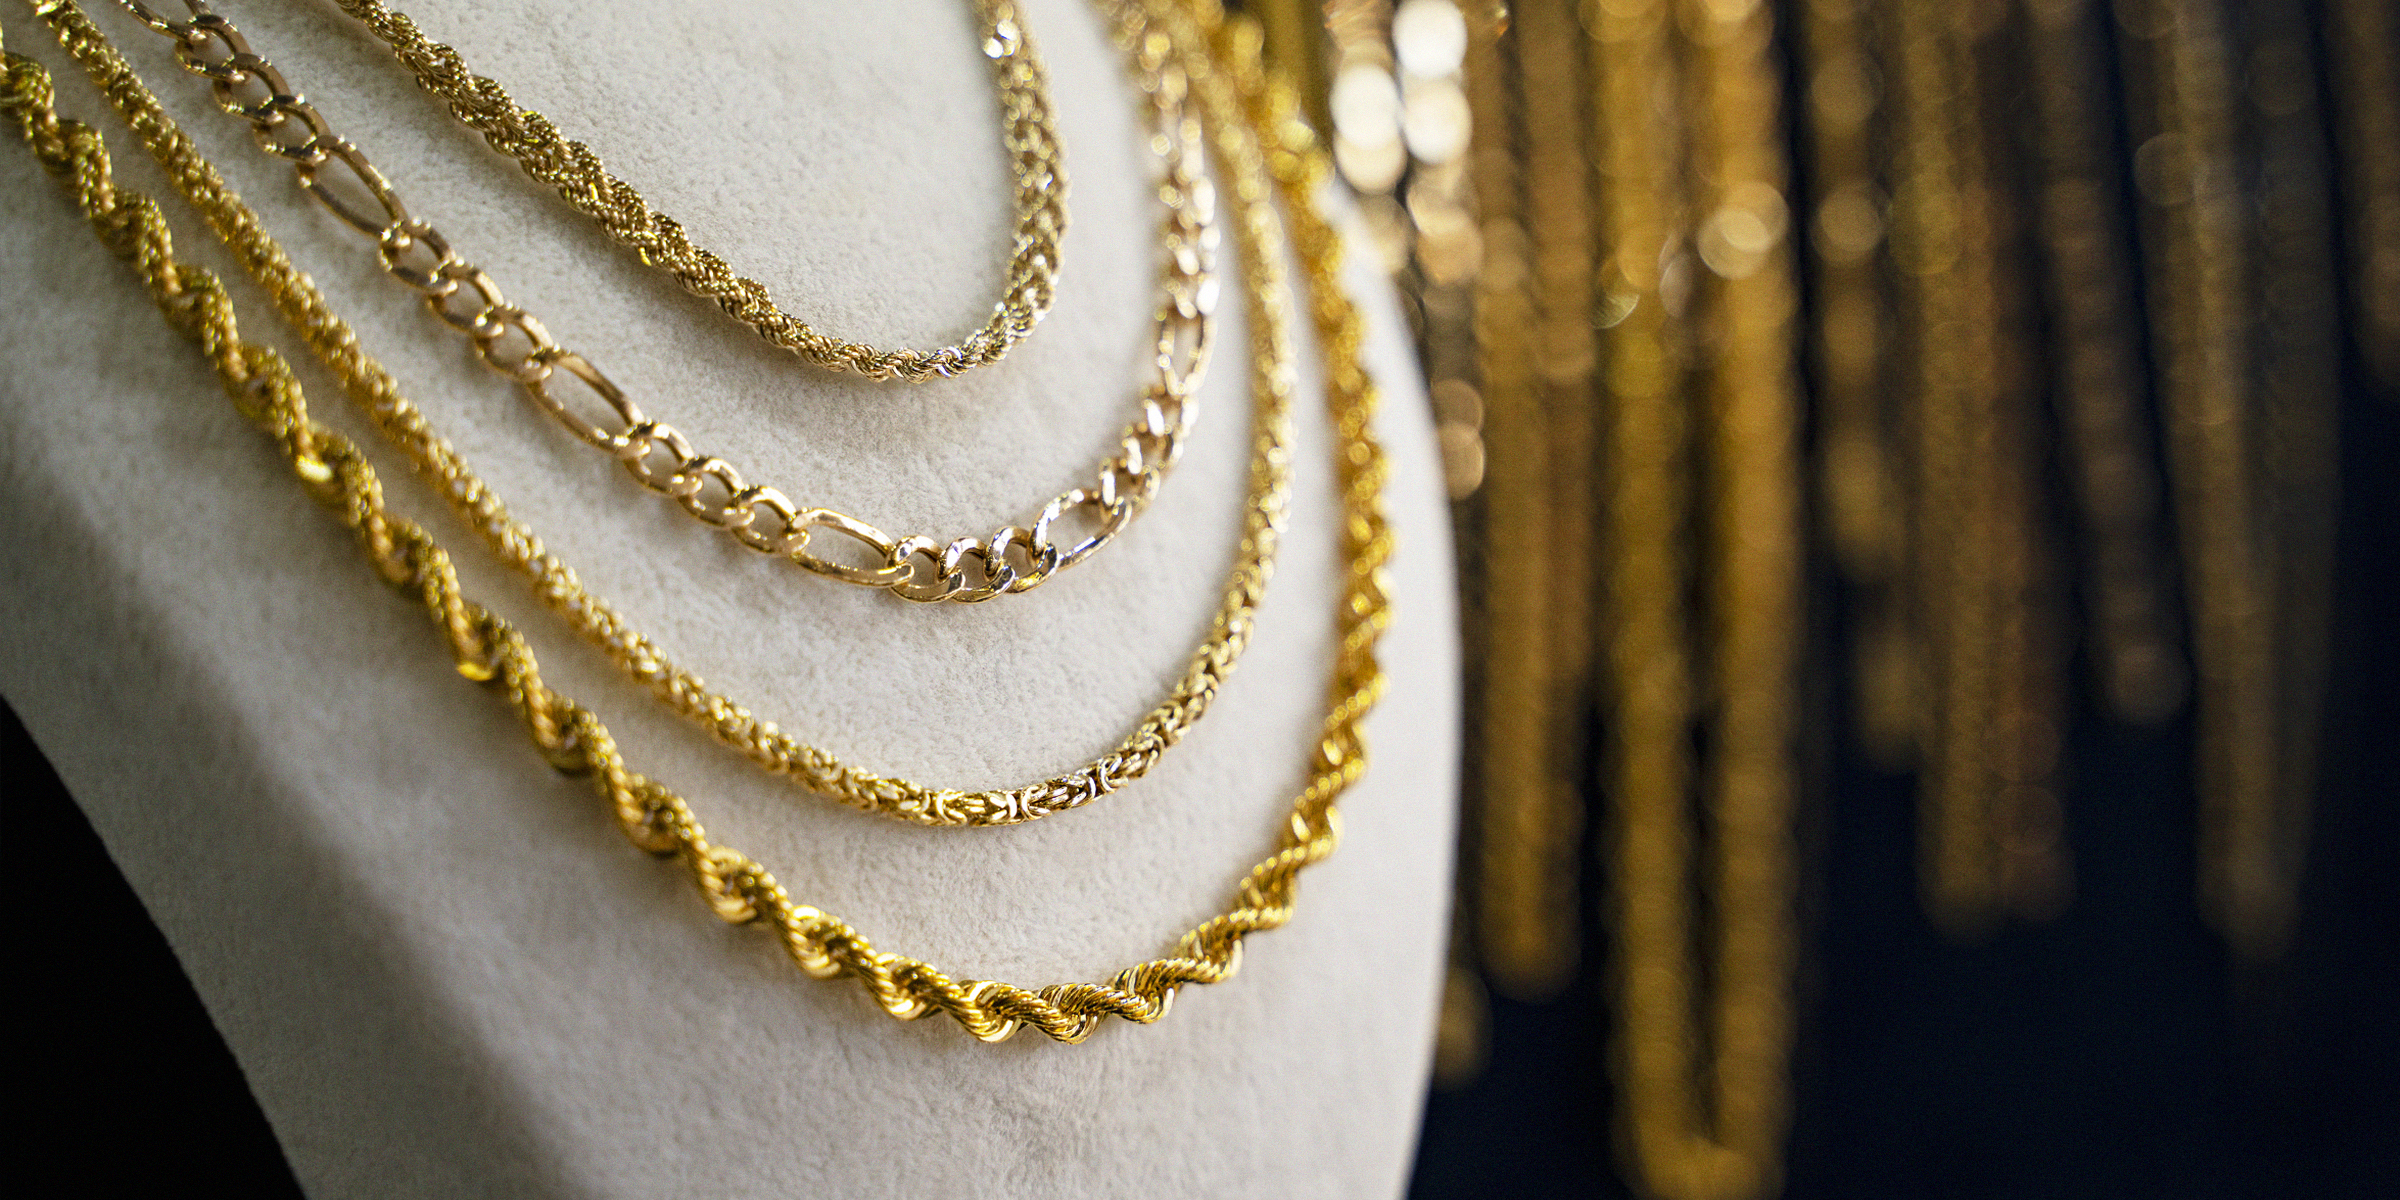 A stack of gold necklaces. | Source: Getty Images